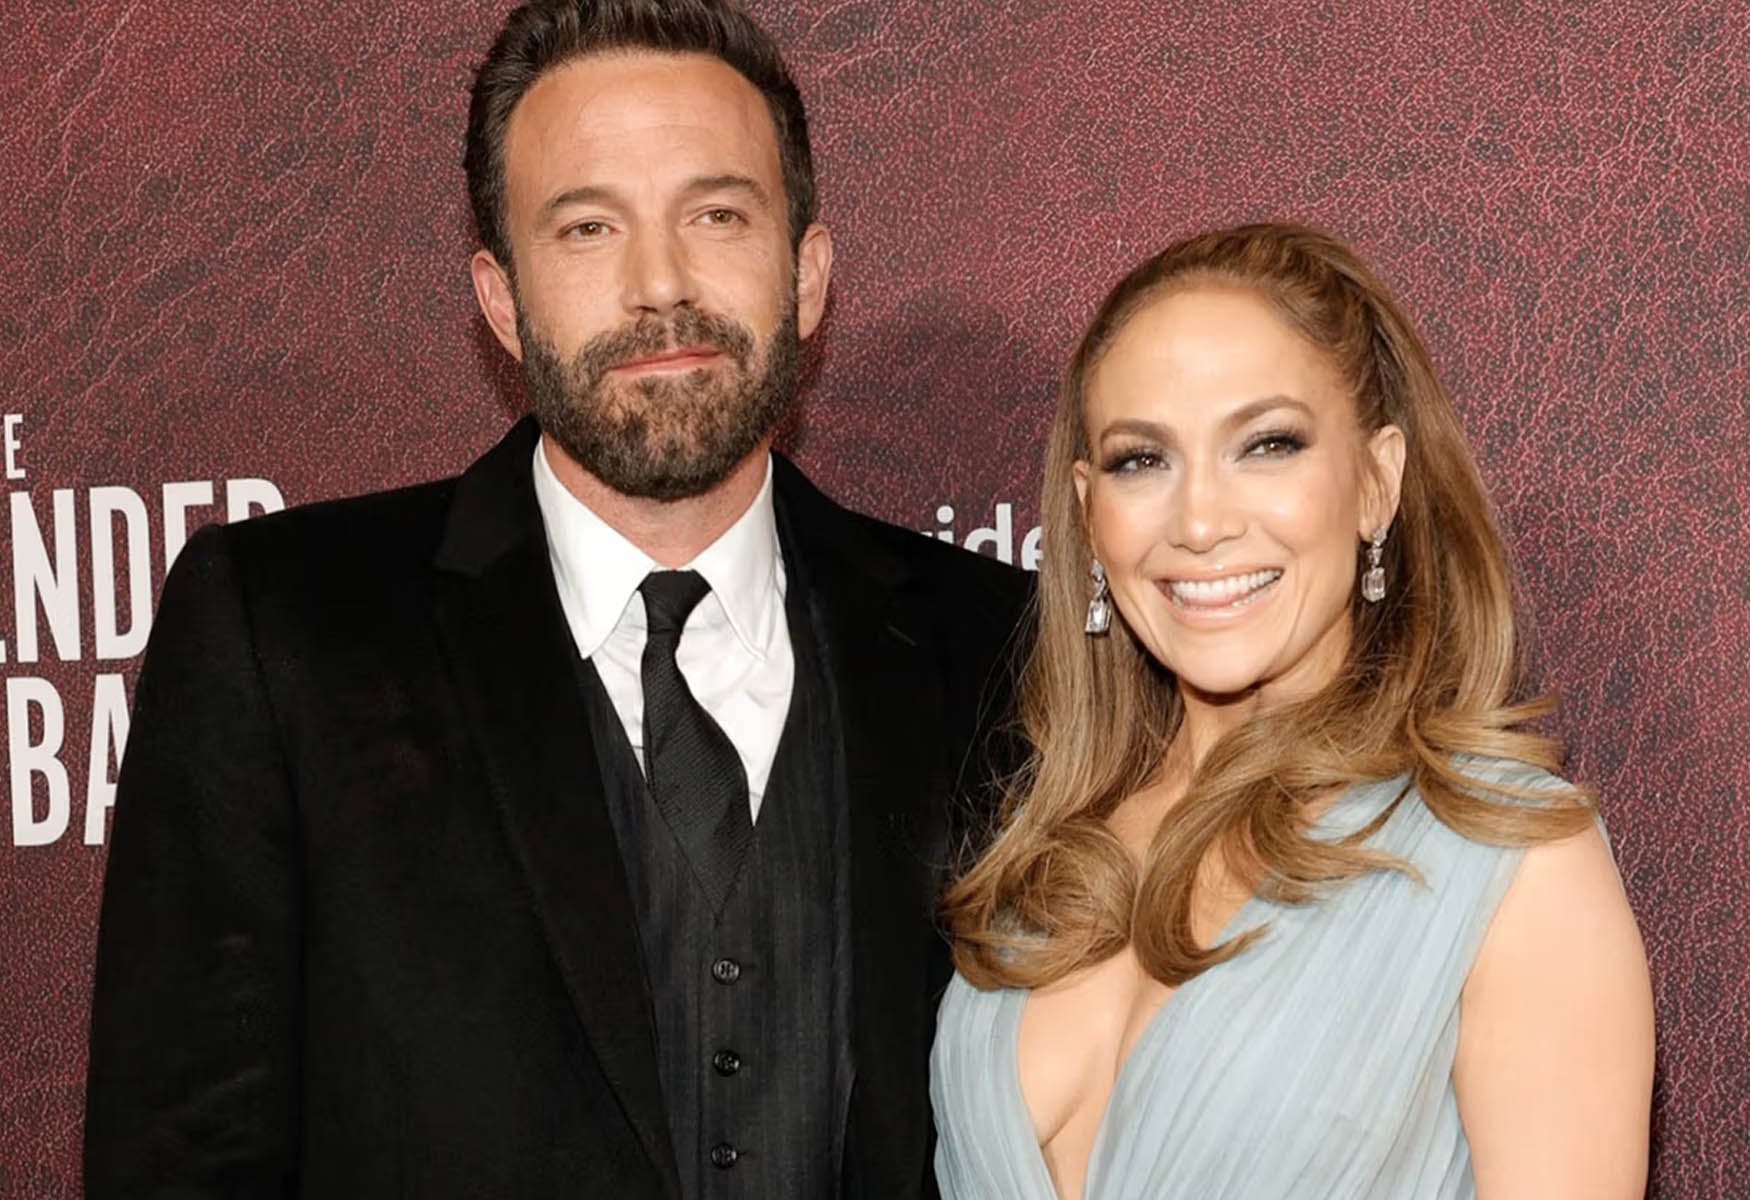 Jennifer Lopez And Ben Affleck Open Up About Media-Driven ‘PTSD’ From Past Relationship